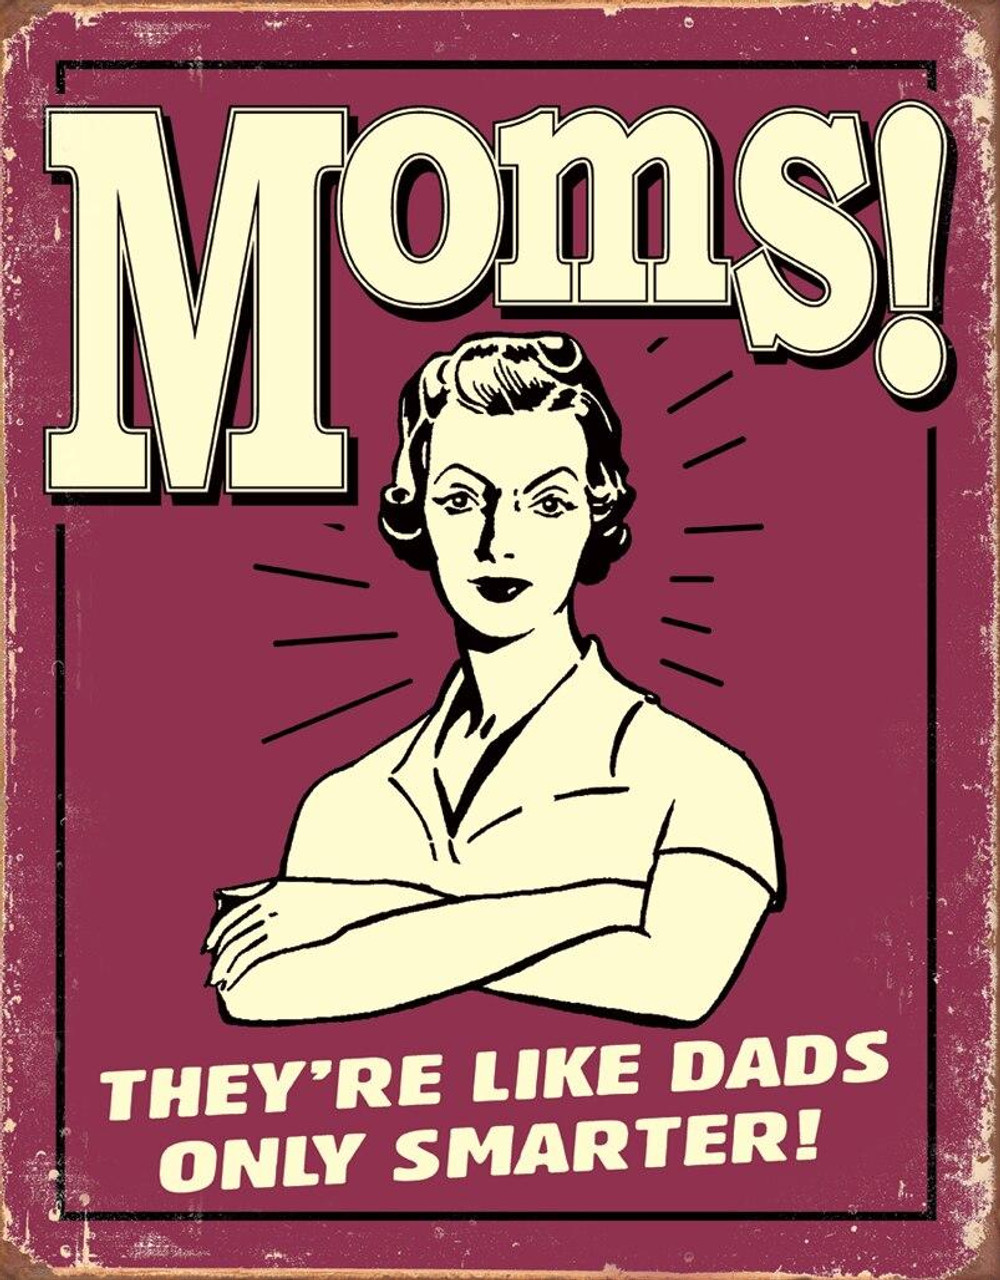 Moms - Like Dads
Brand: N/A
Sign Material: Tin sign
Sign Size: 12.5in x 16in - 31.75cm x 40.64cm
Print Layout: Vertical/Portrait
Made In: U.S.A

Proudly & Always Will be AMERICAN Made!